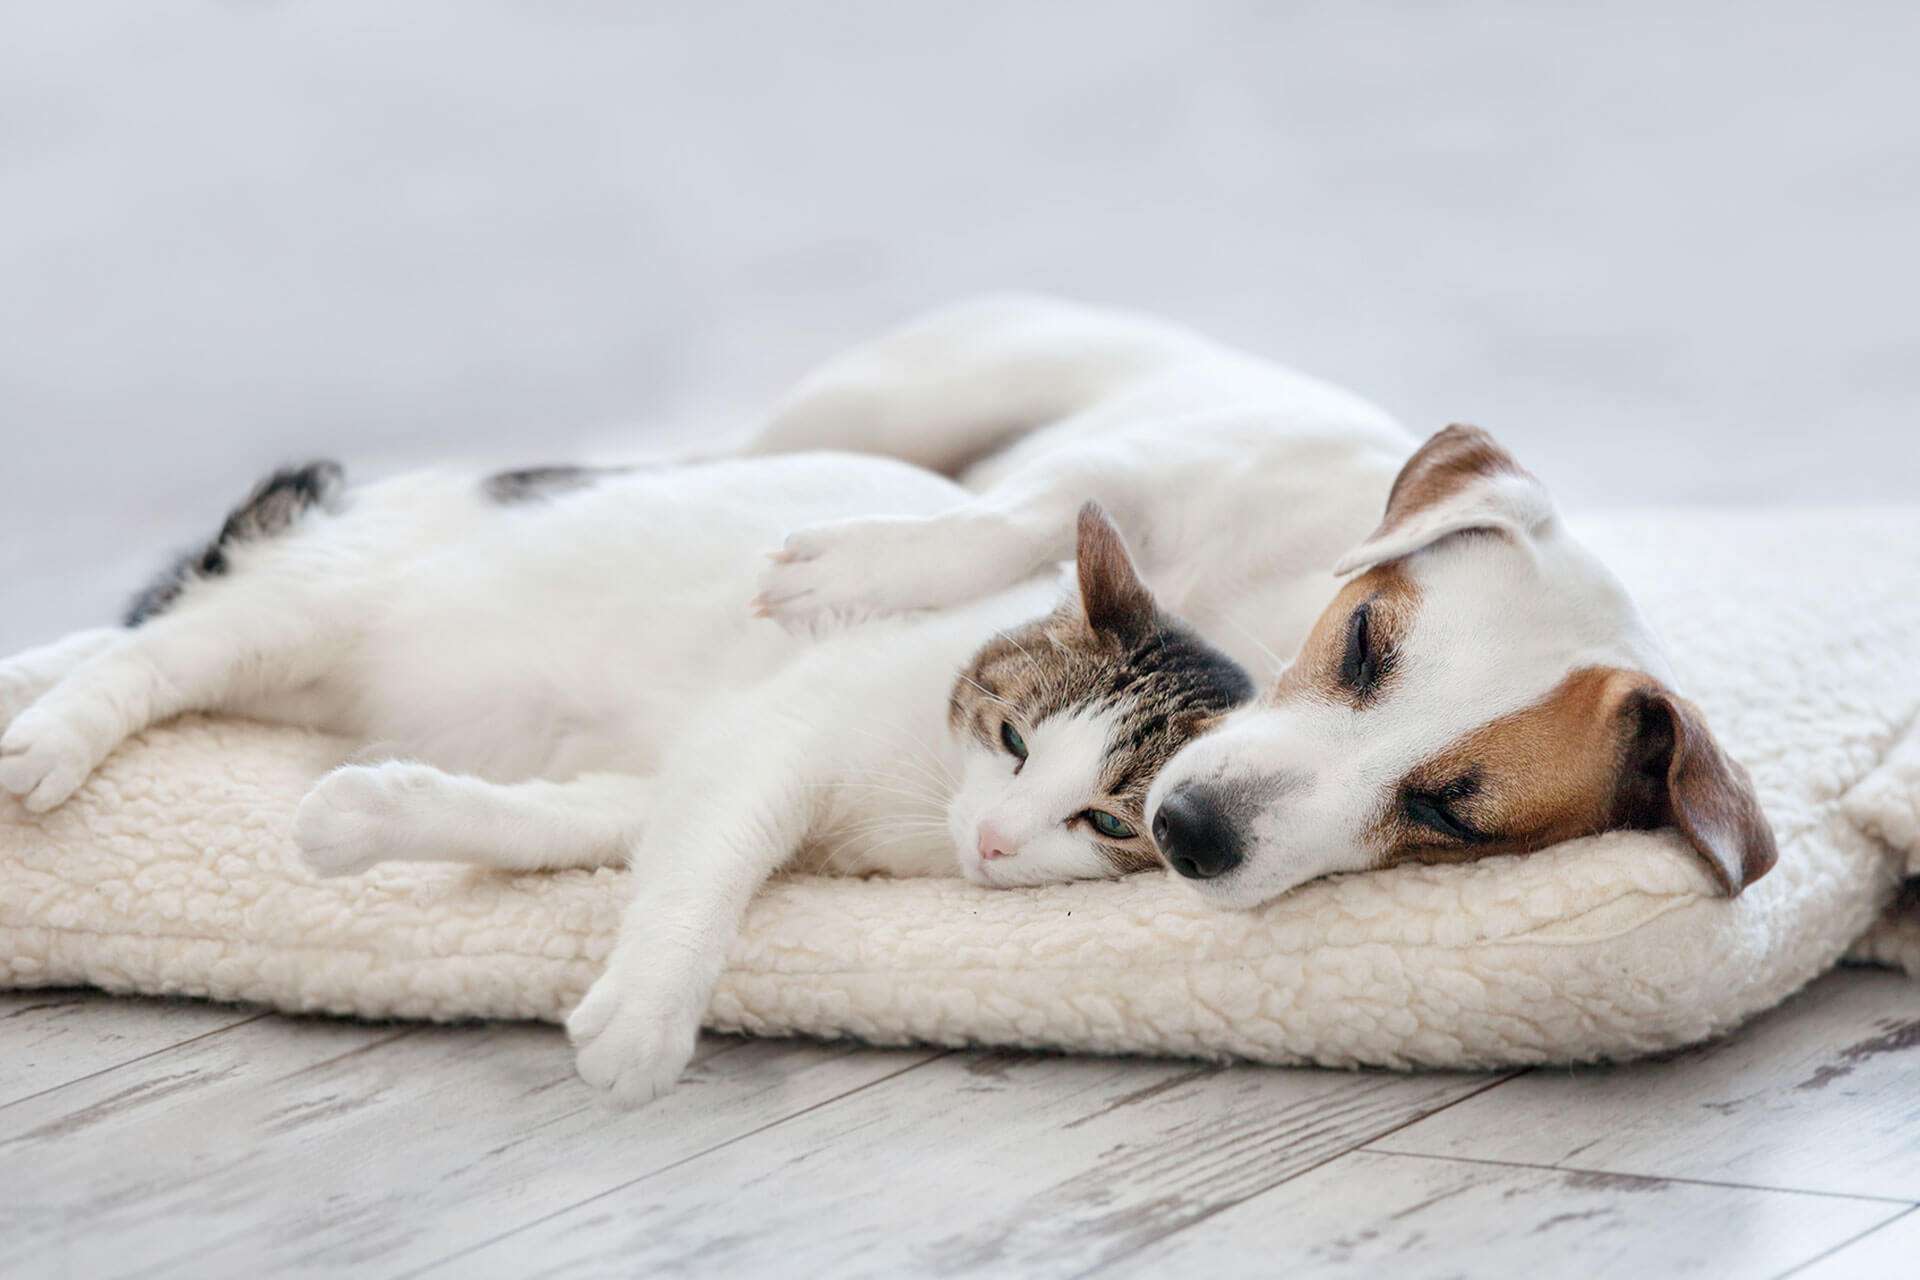 Why do dogs and cats not get along?